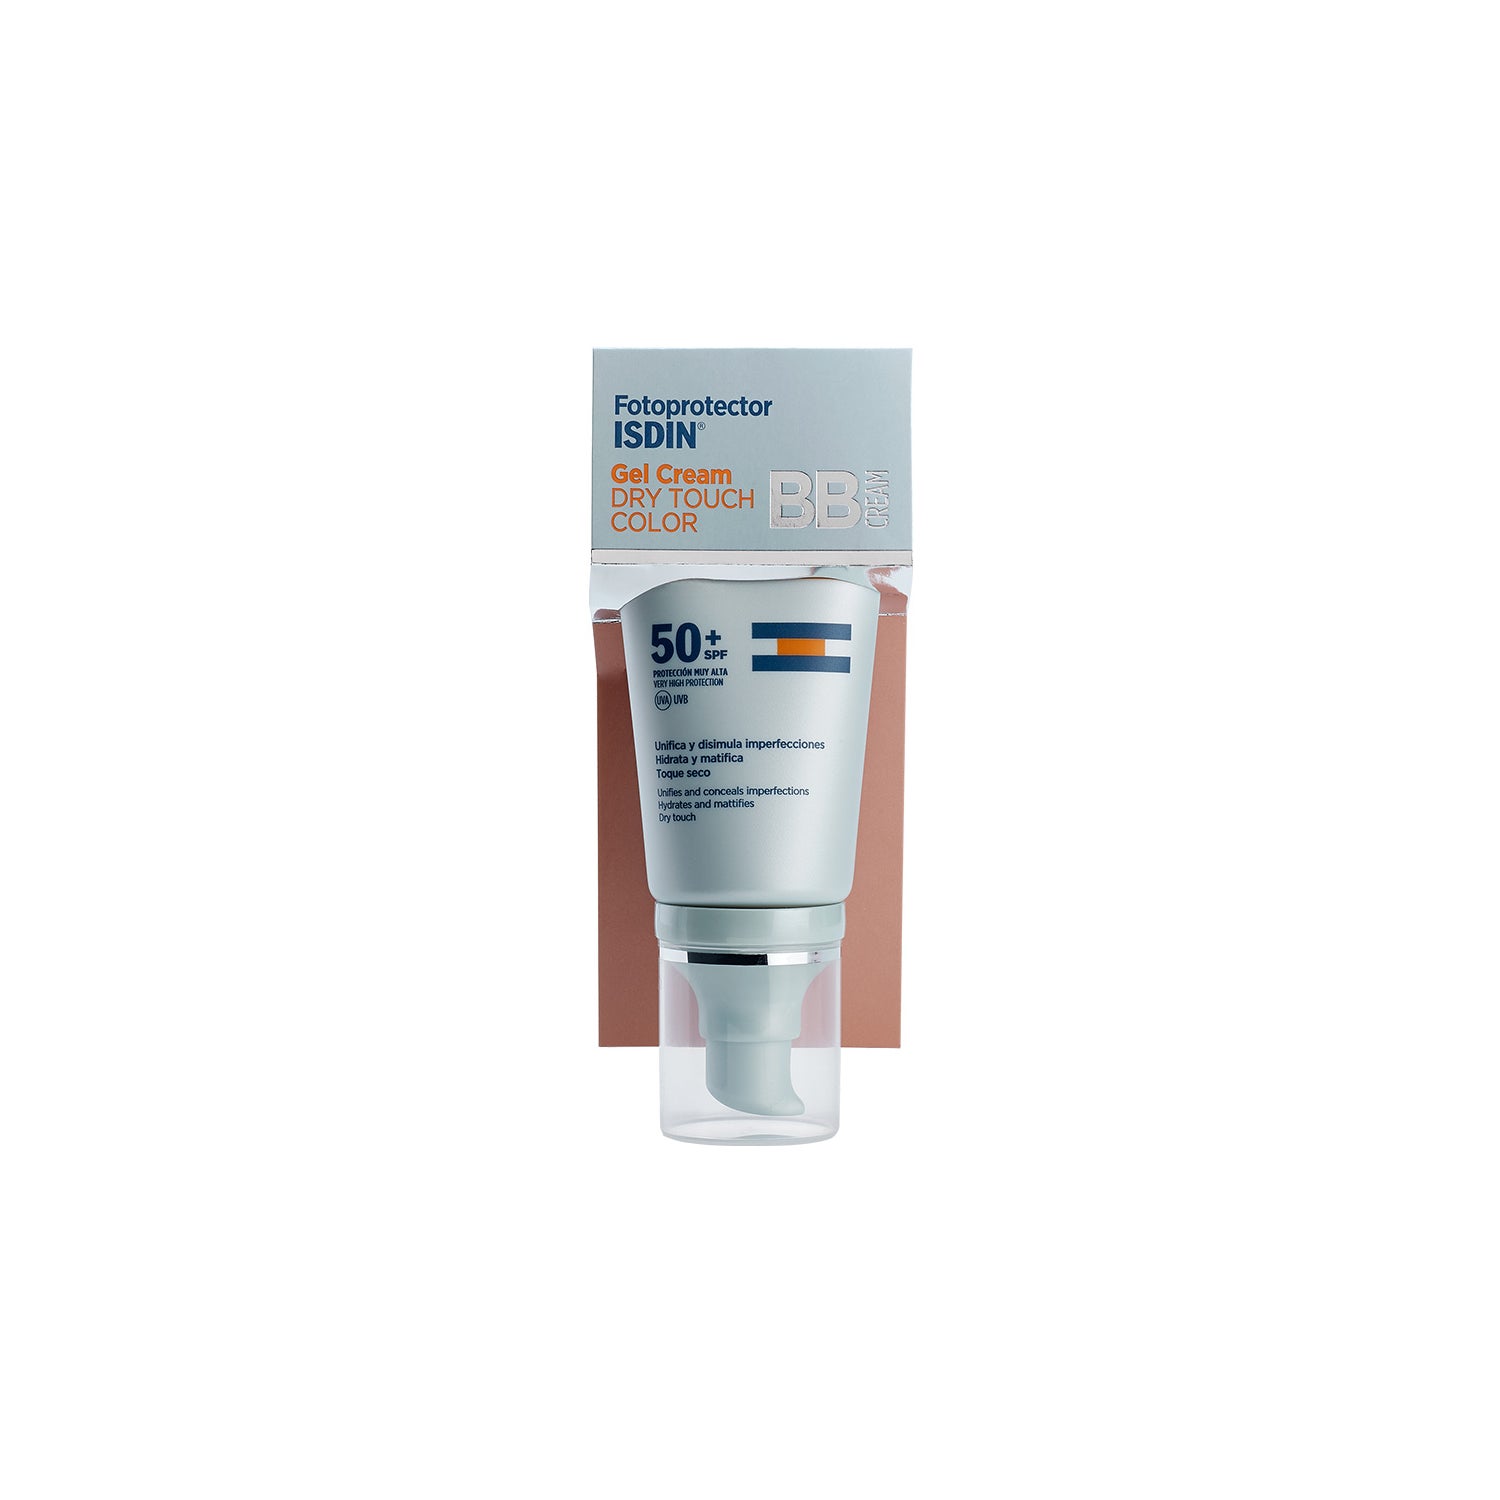 fotoprotector isdin dry touch gel crema color spf50 50ml